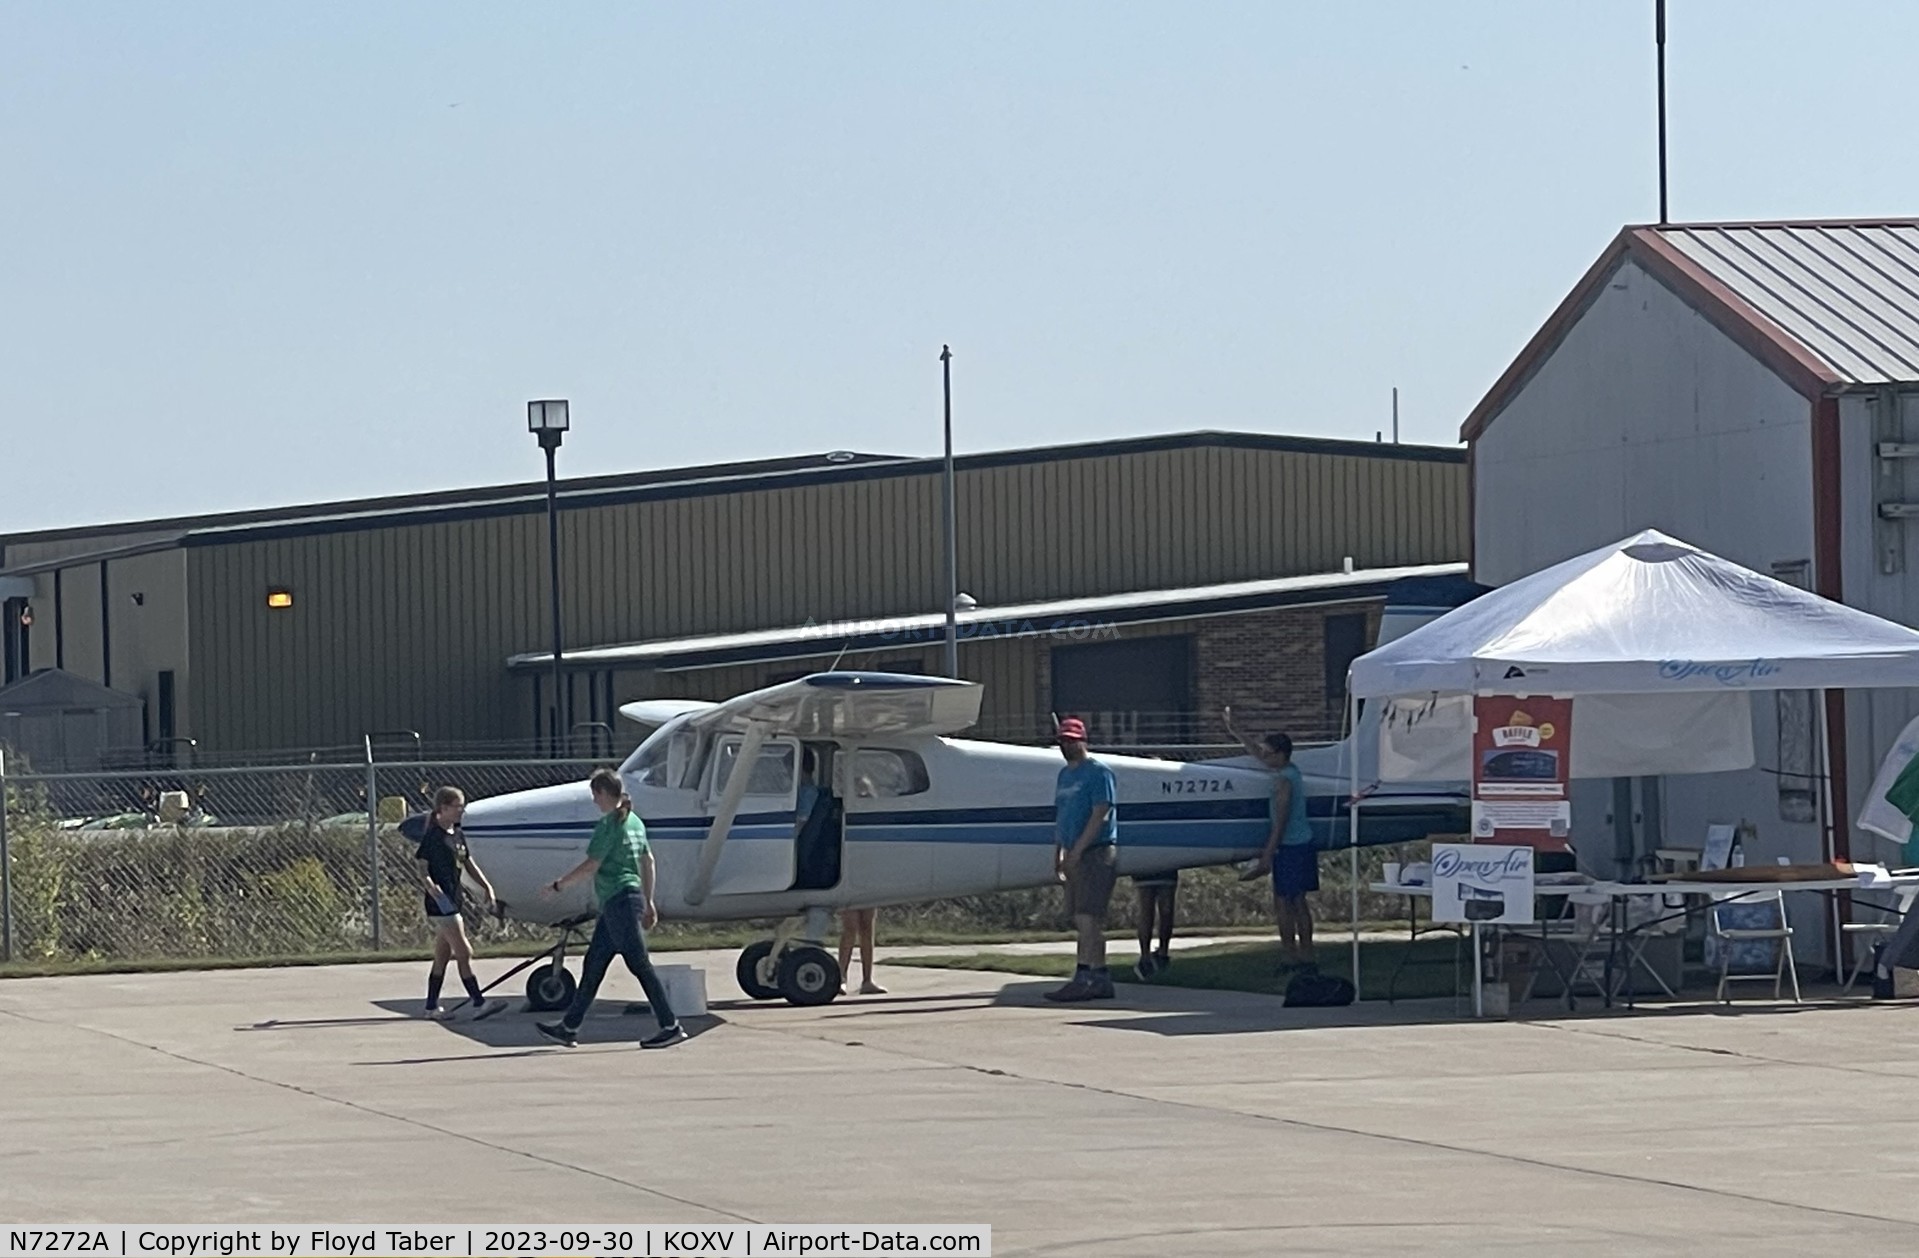 N7272A, 1956 Cessna 172 C/N 29372, Fly Iowa 2023 Knoxville Iowa